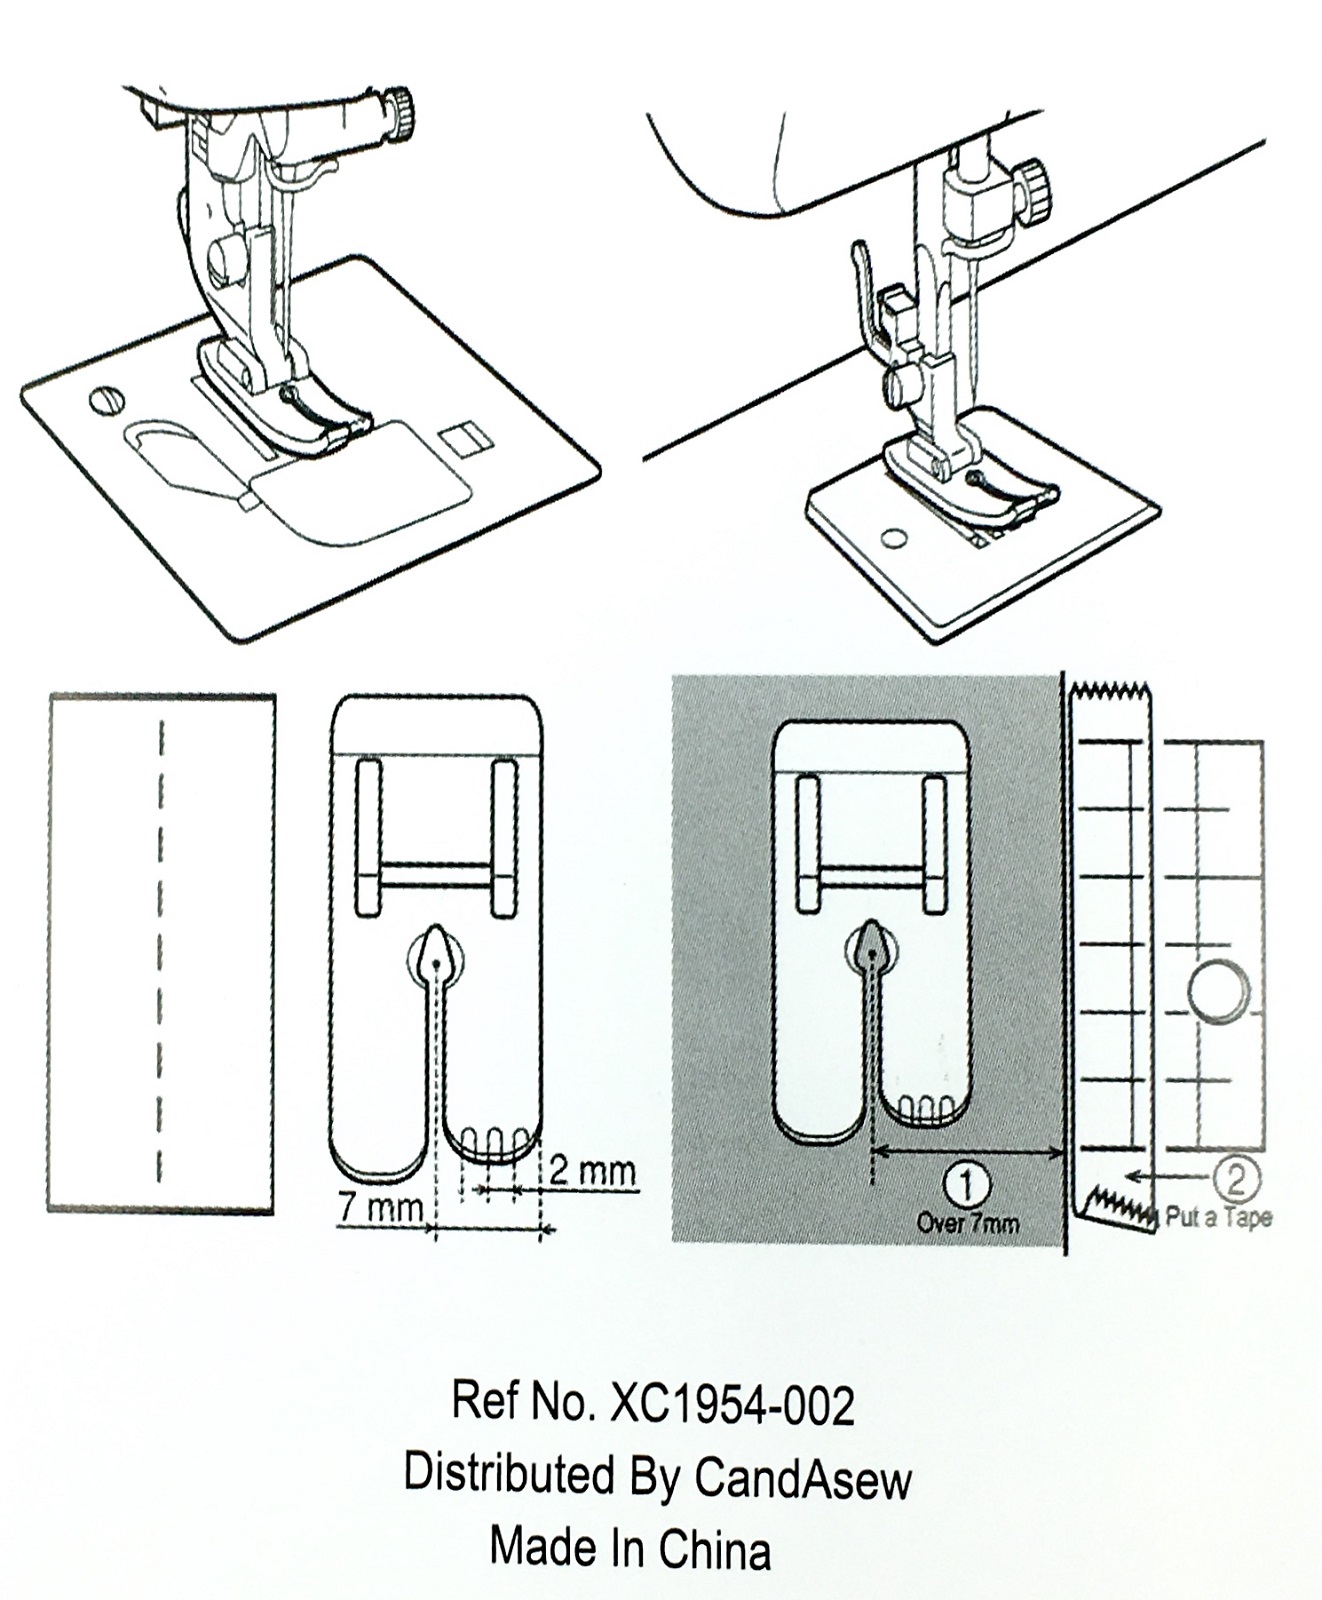 Straight Stitch Foot for Brother - SA108